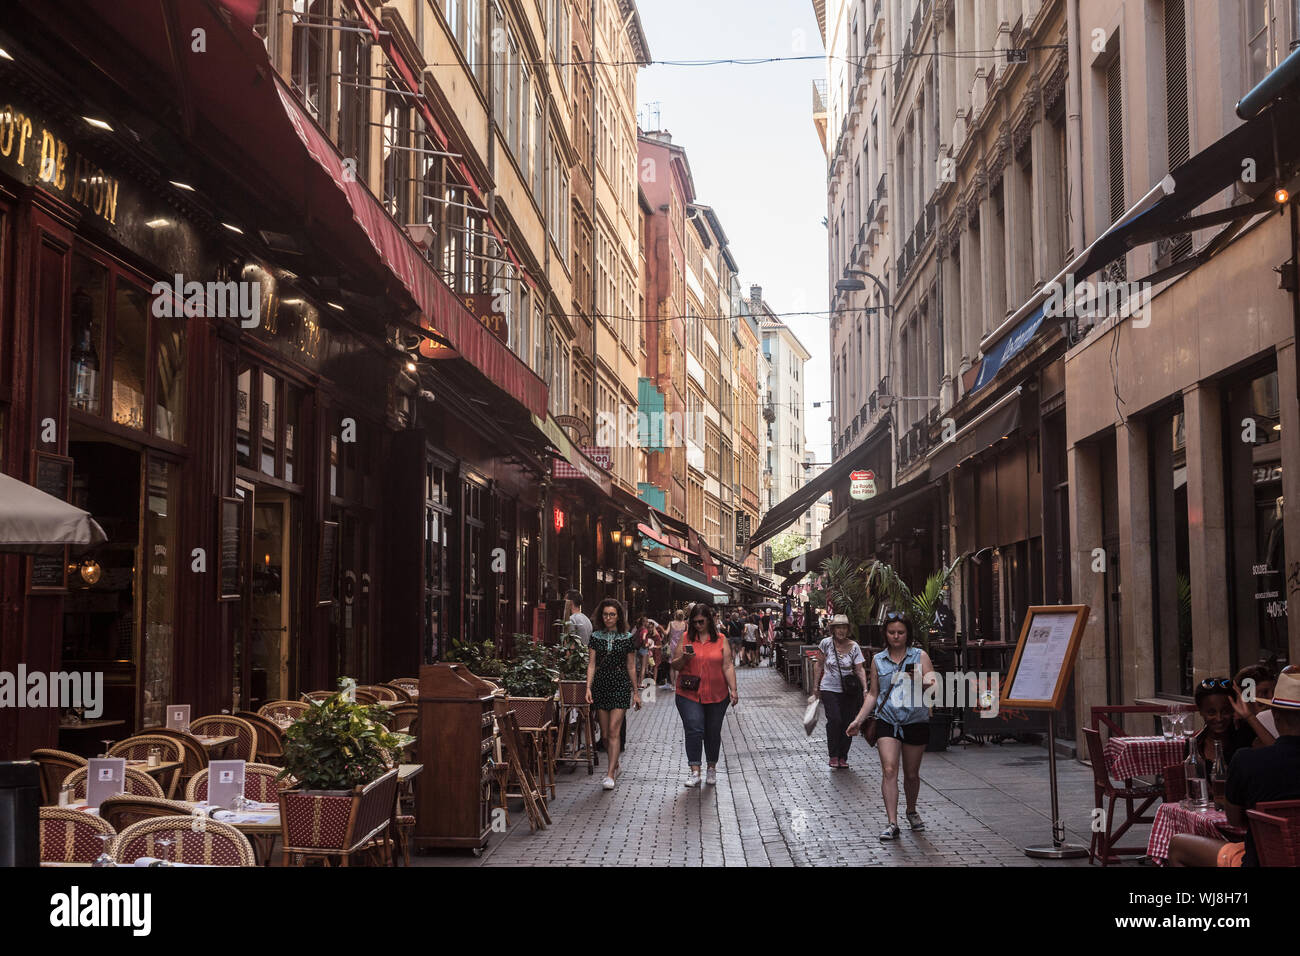 LYON, FRANCE - JULY 13, 2019: Tourists walking in Typical street of the Vieux Lyon (old Lyon) on the Presqu'ile district with tourists passing by near Stock Photo